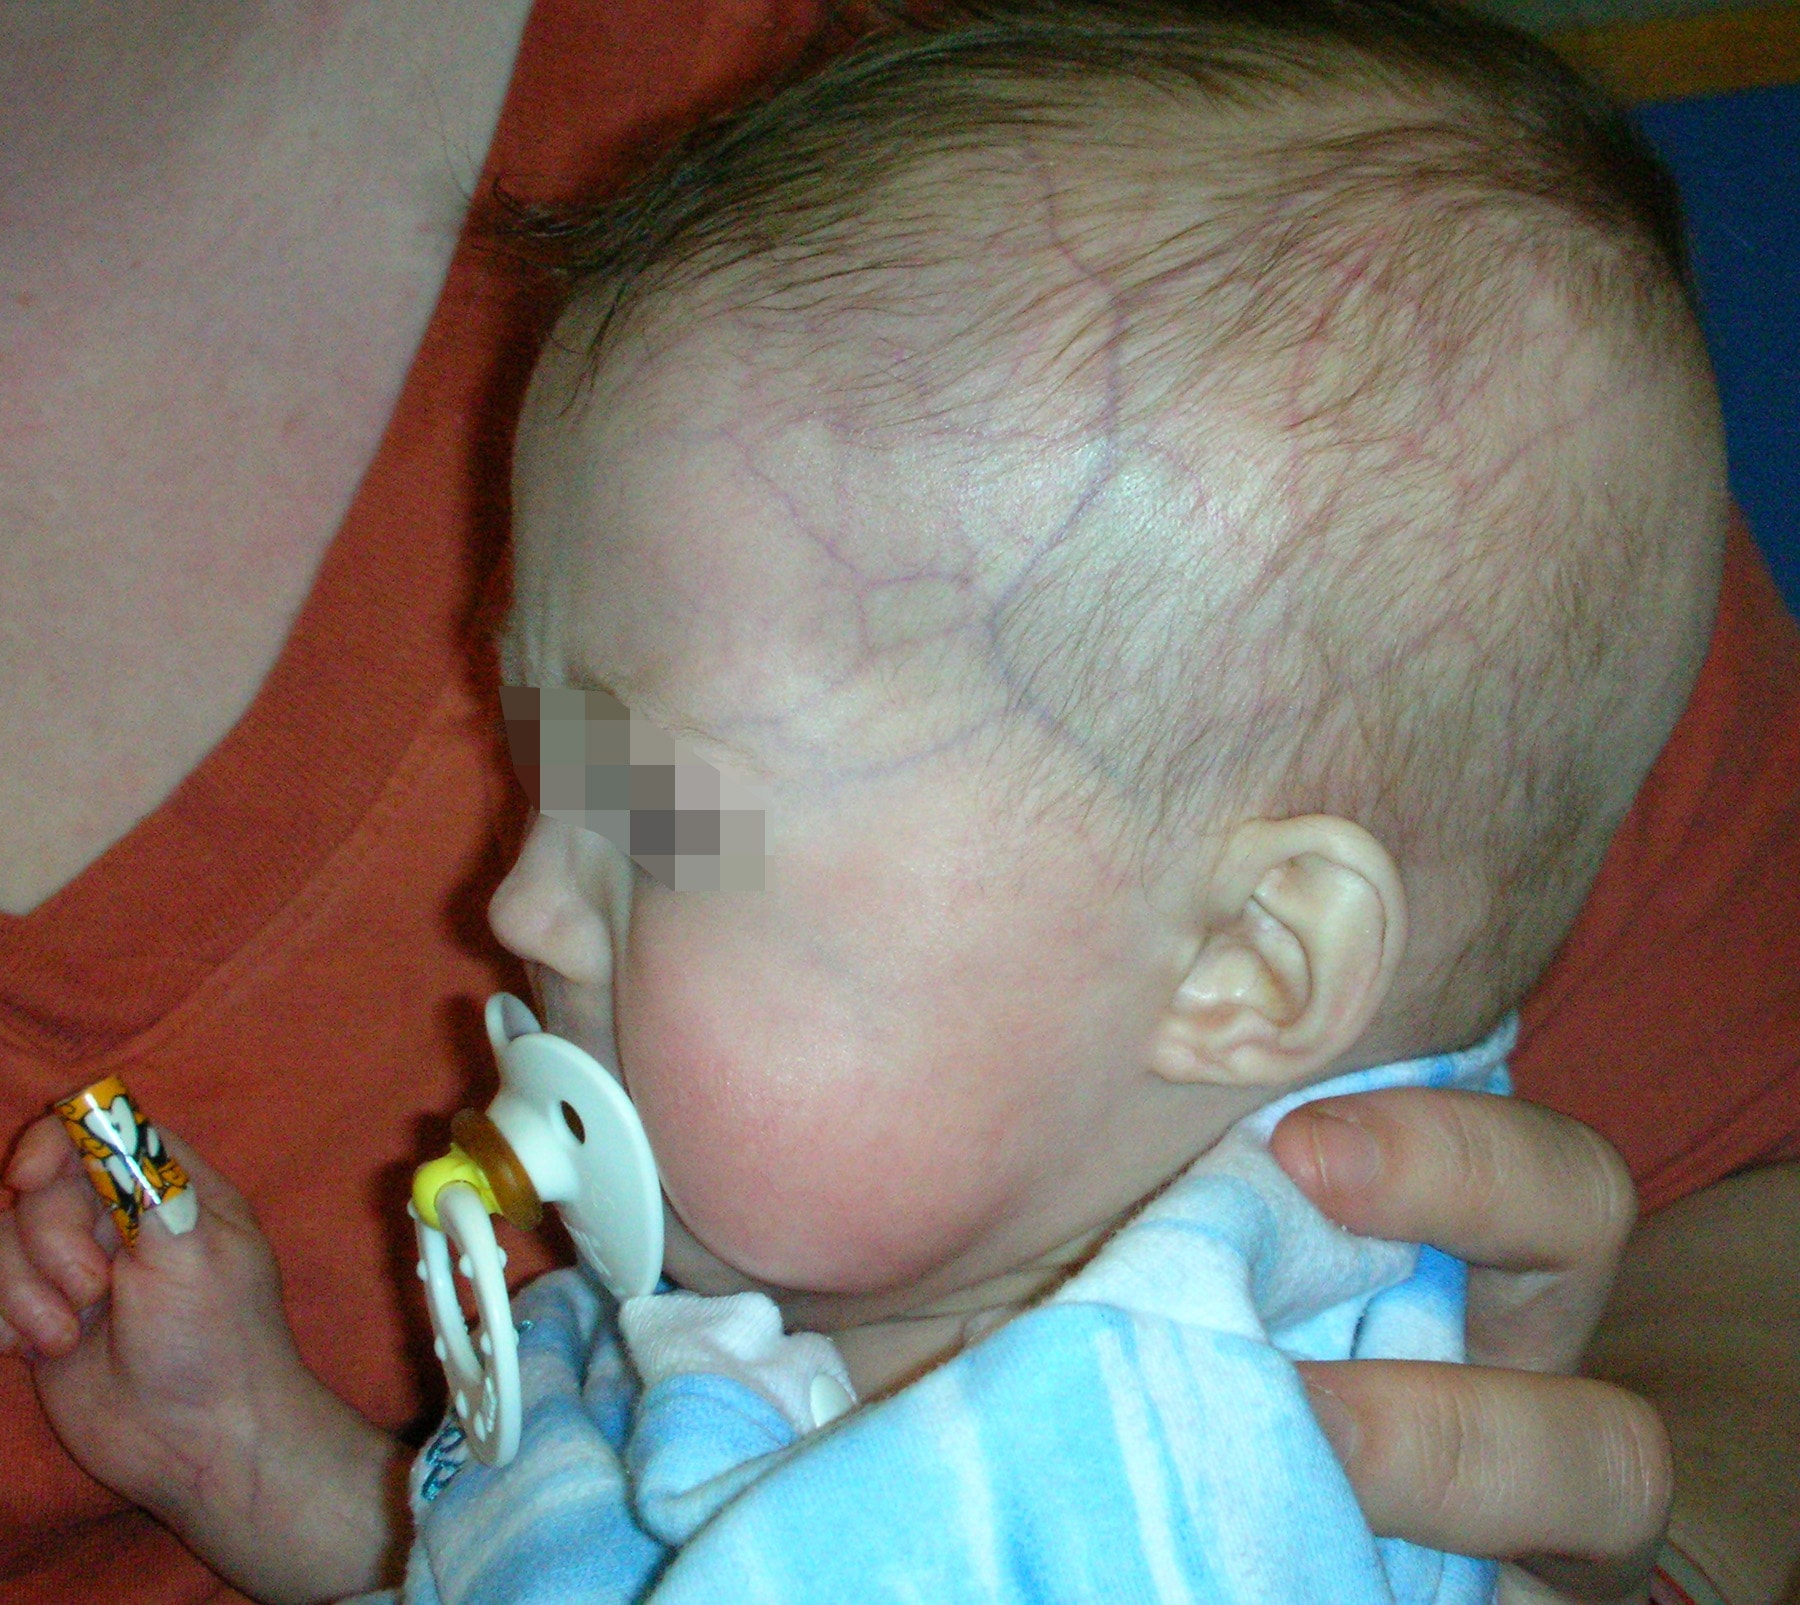 Medical Mystery Monday #108: the case of the balding baby ...